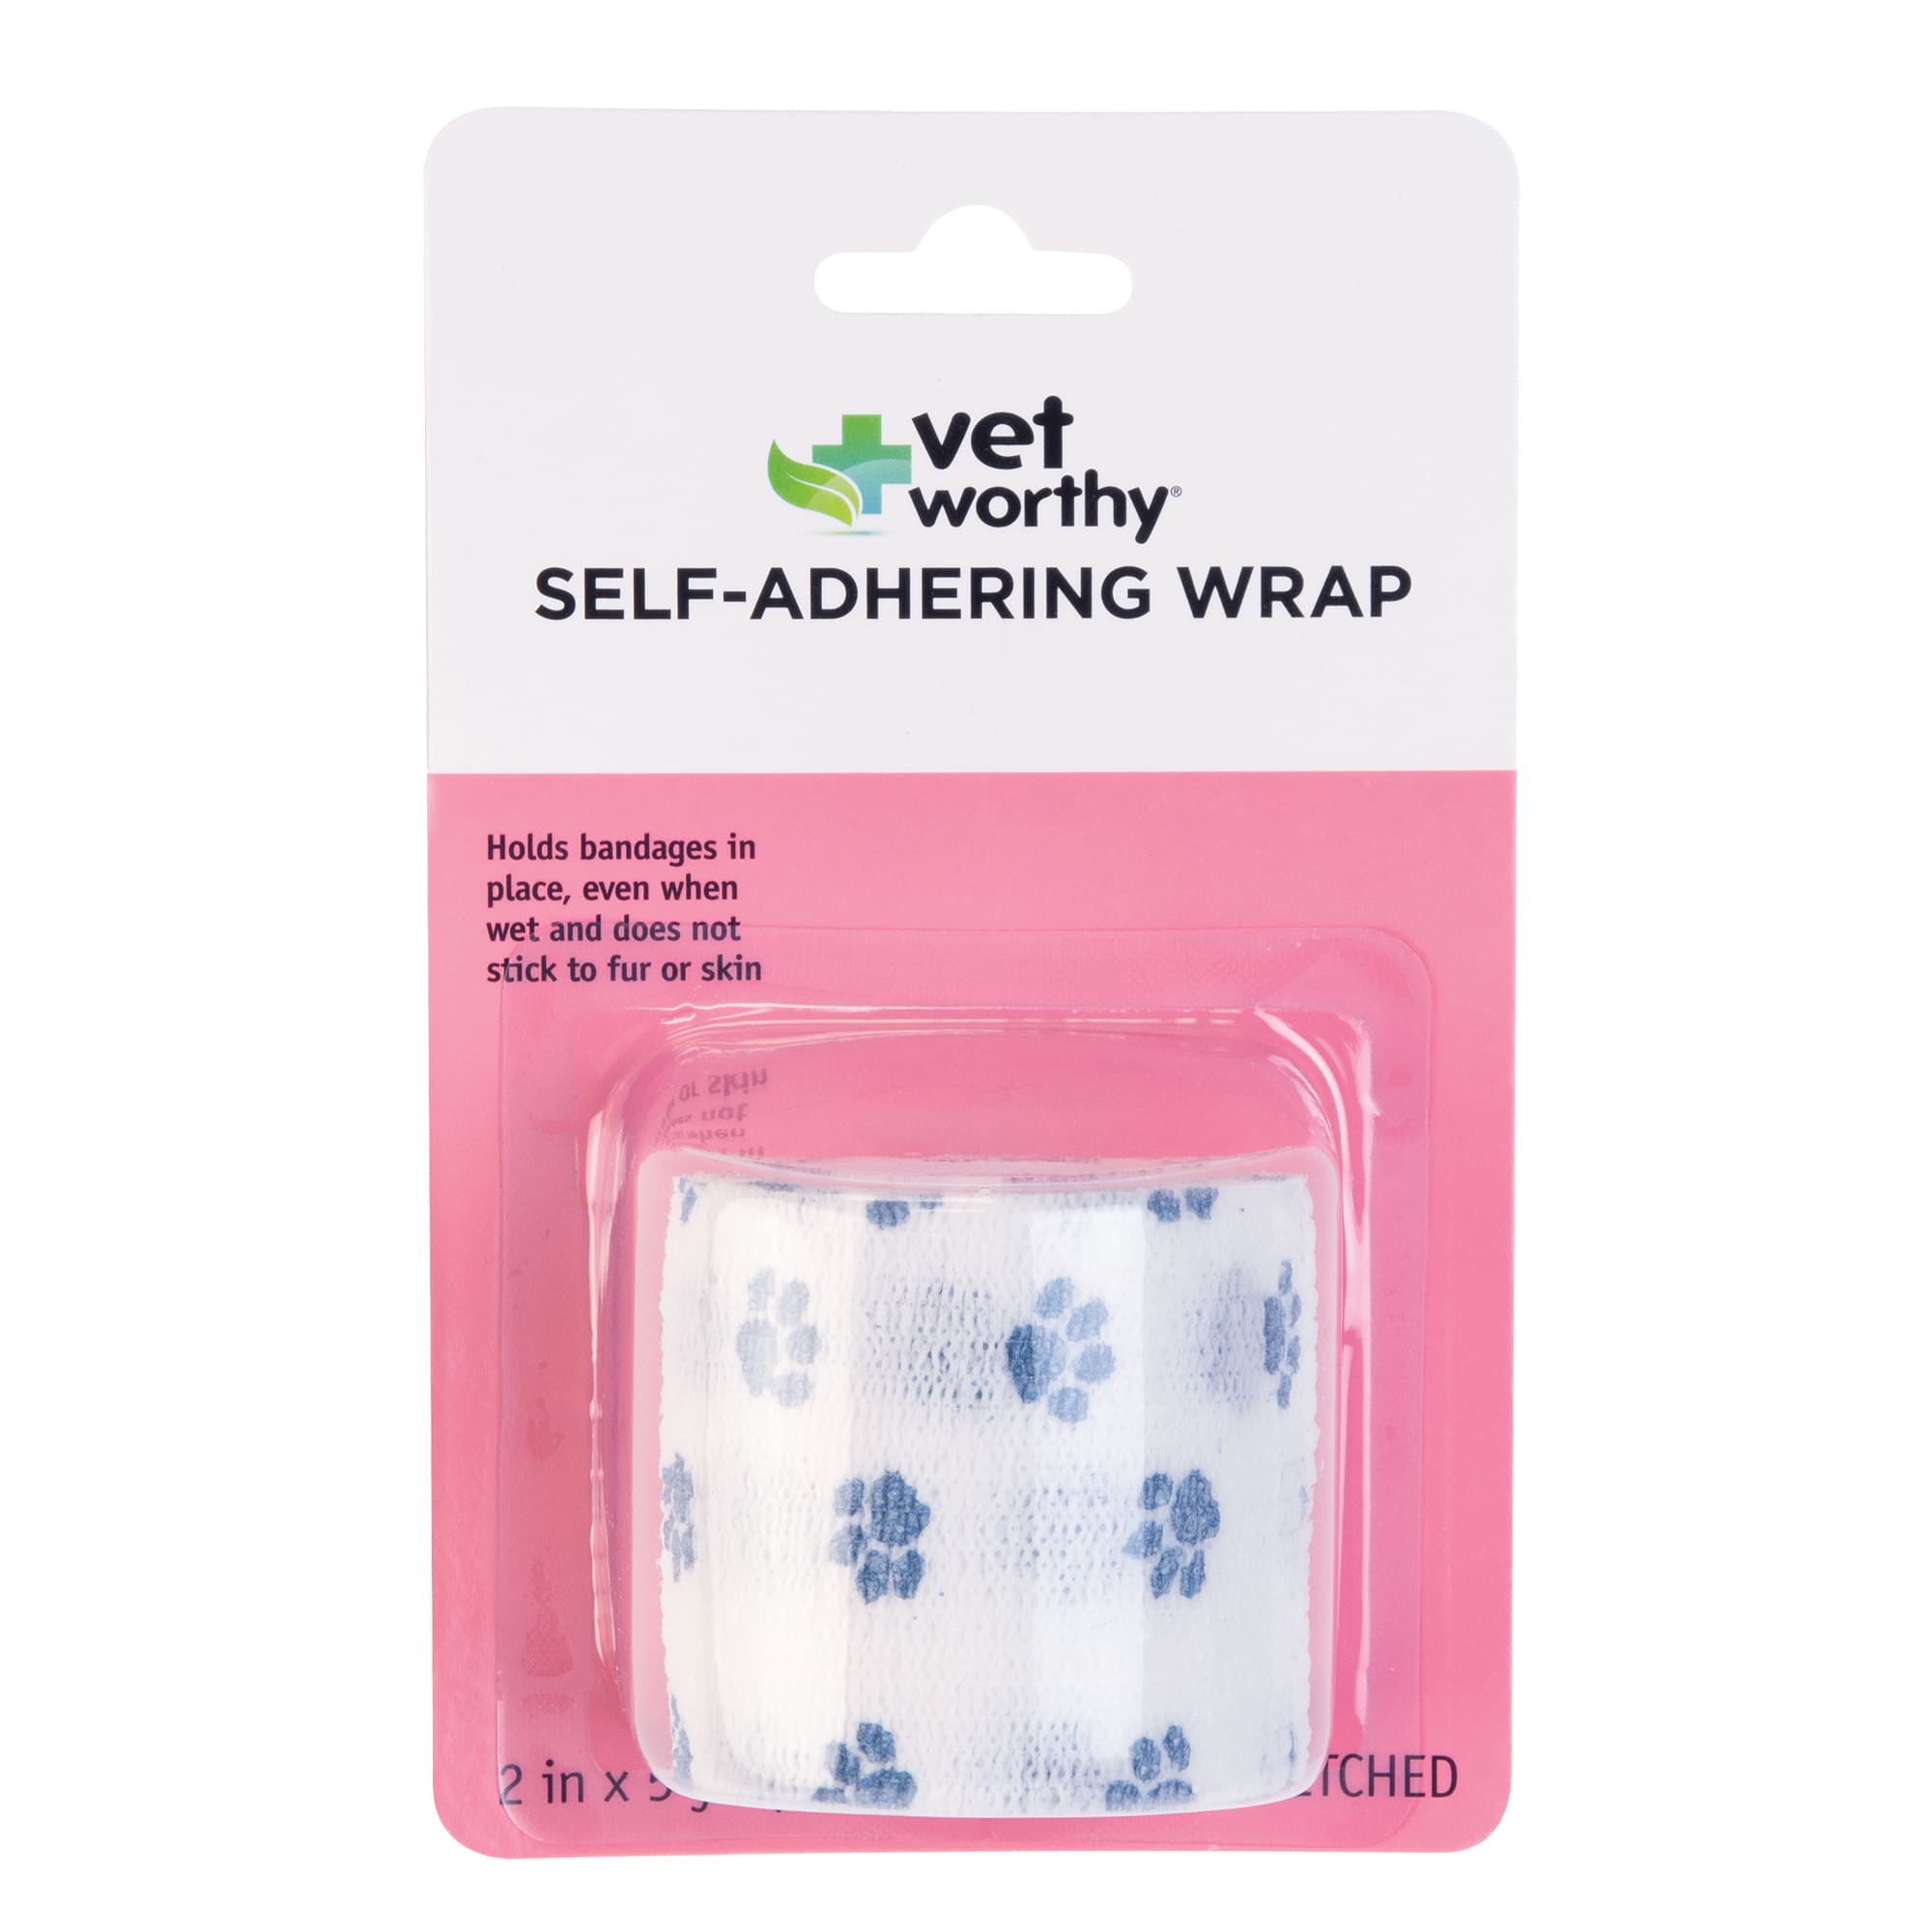 Self Adhesive Adherent Adhering Cohesive Flex Self Stick Bandage Grip Roll Dog Cat Pet Horse 2 Pack Vet Wrap Rap Tape Assorted Colors, Paw Prints, Patterns 2, 3, or 4 Inch x 15 feet 